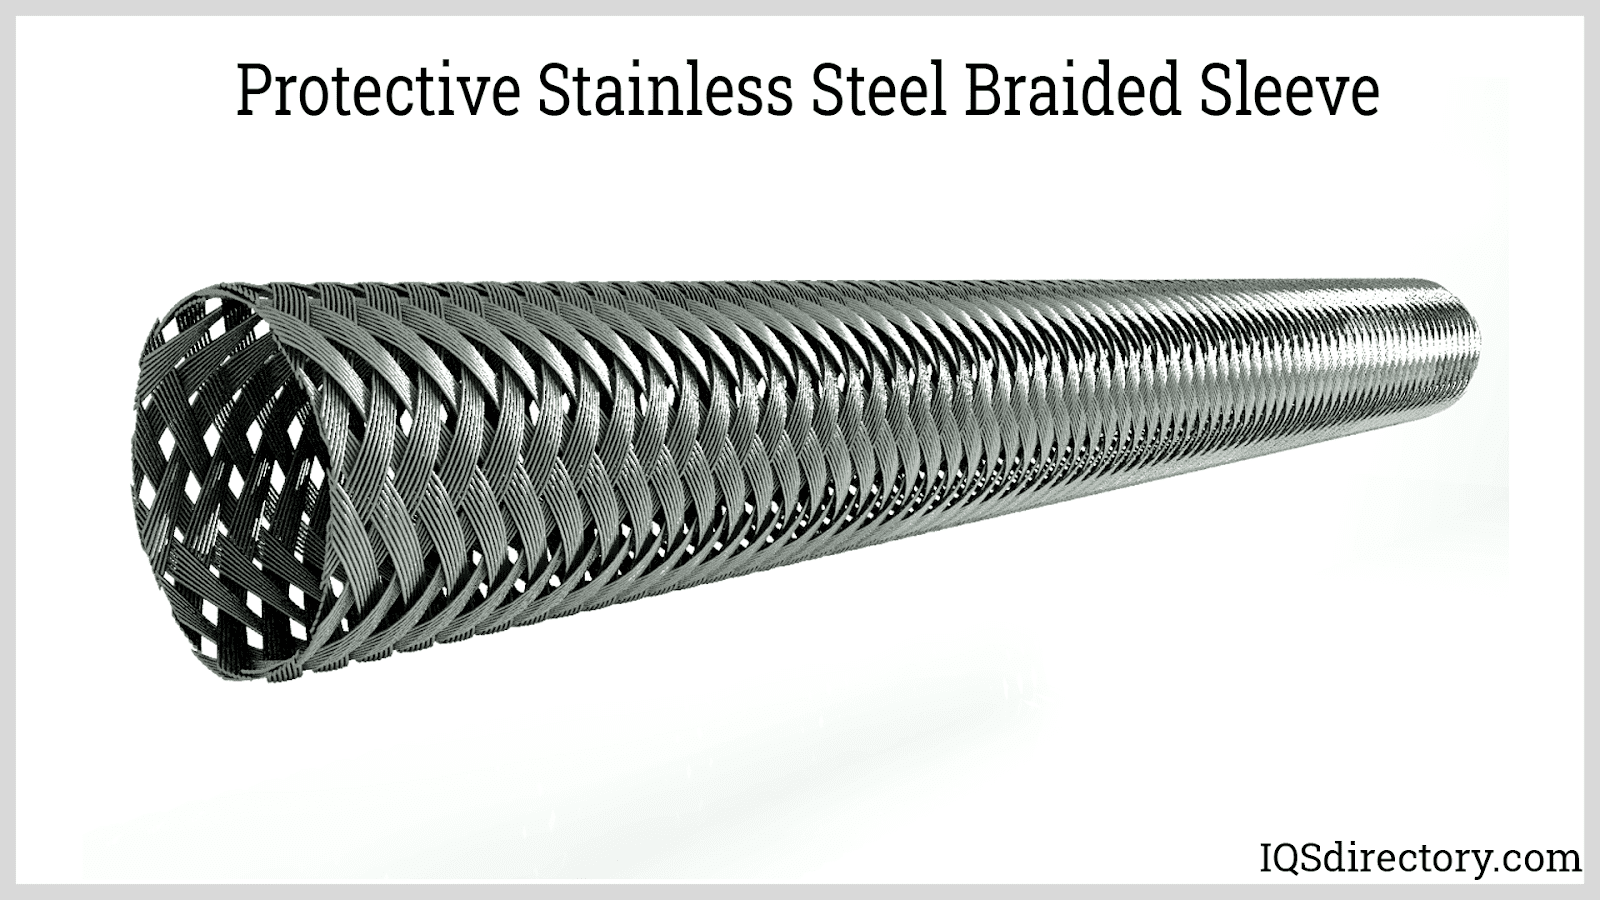 Protective Stainless Steel Braided Sleeve